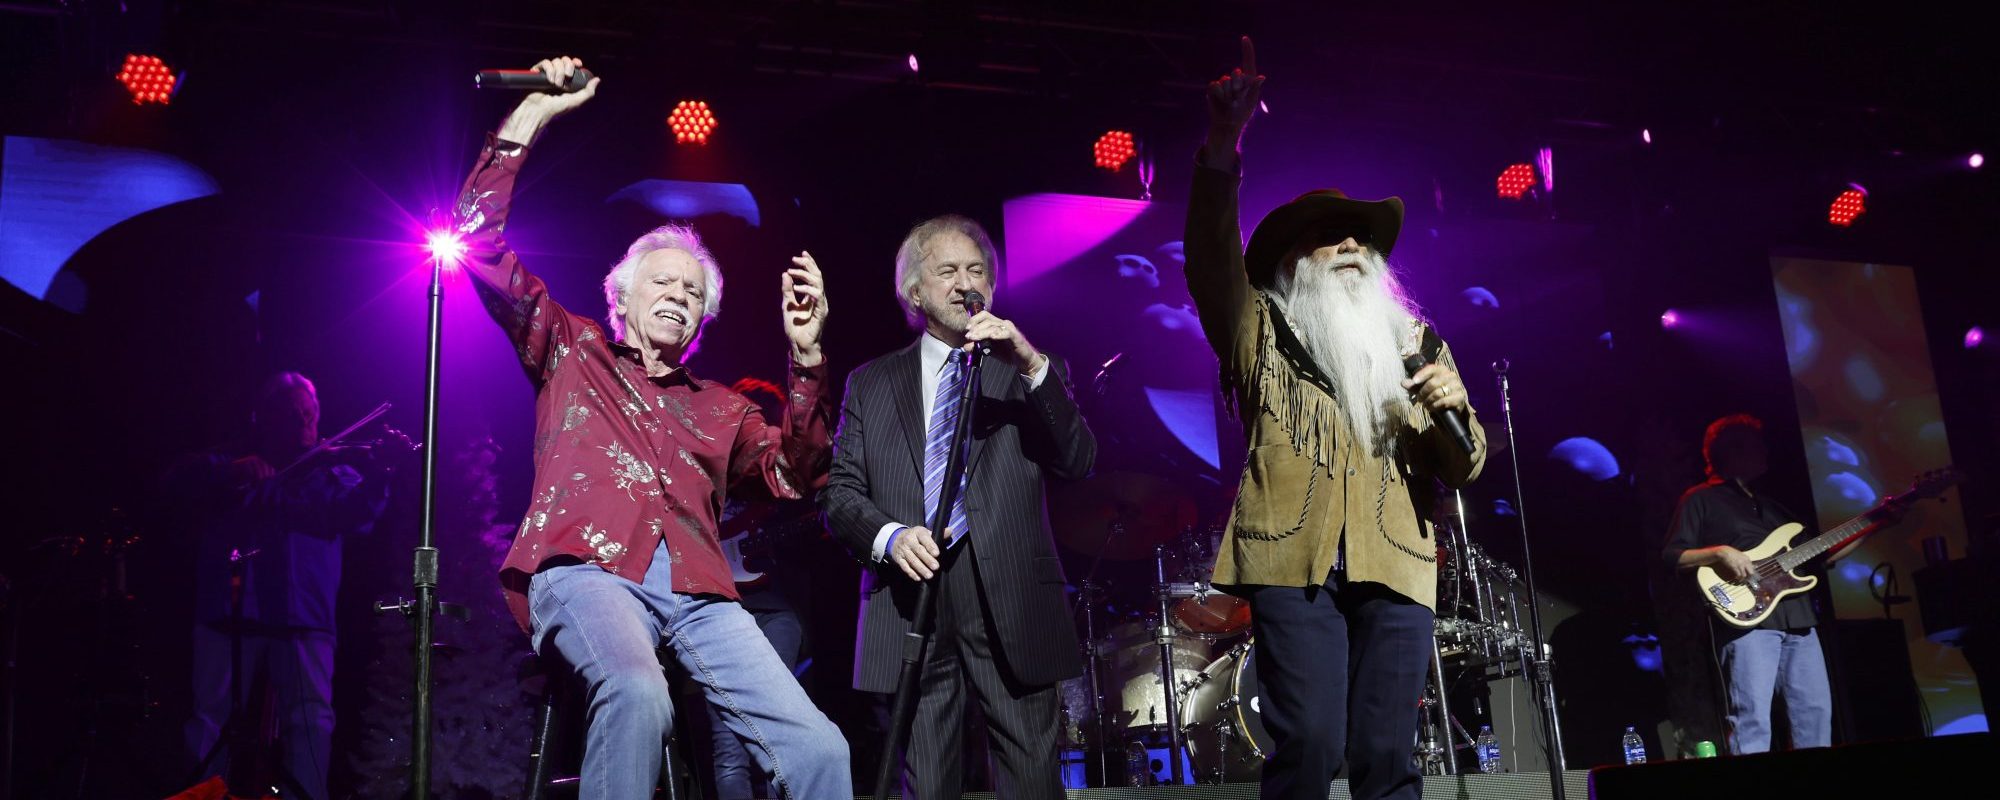 Oak Ridge Boys Honored With Tennessee Music Pathways Marker at Entrance of Grove Theater in Oak Ridge